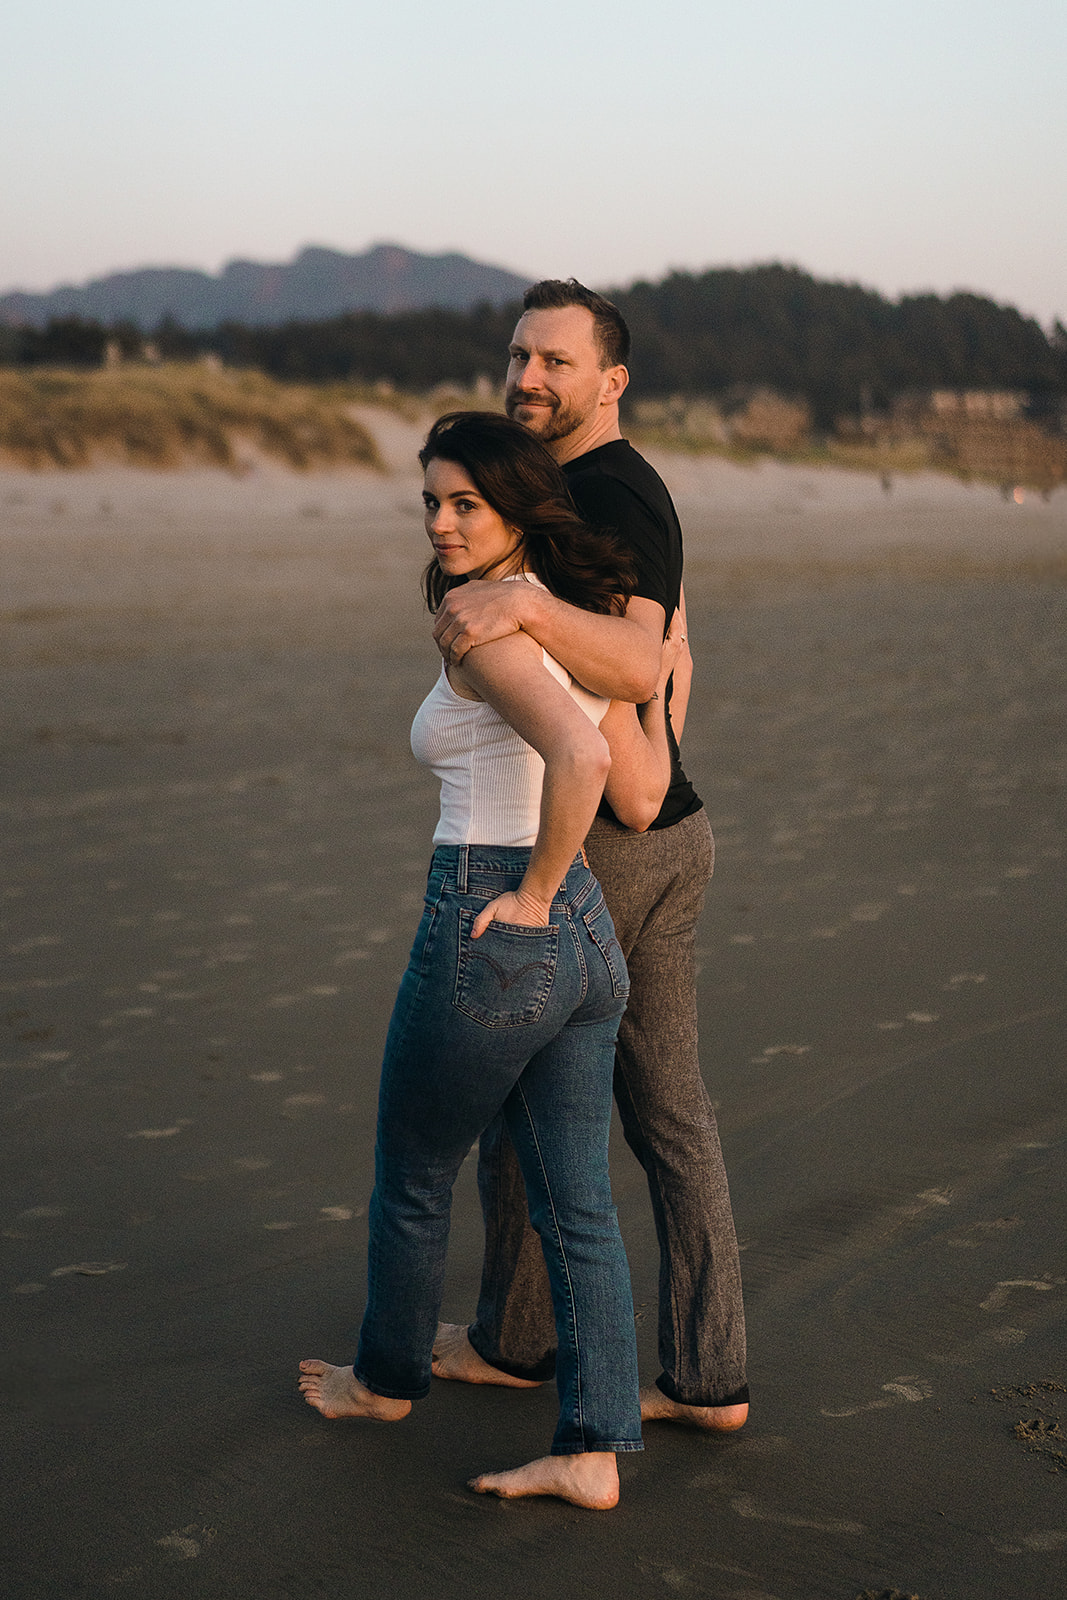 couples looks back at the camera while walking on the beach during Cannon Beach Engagement session